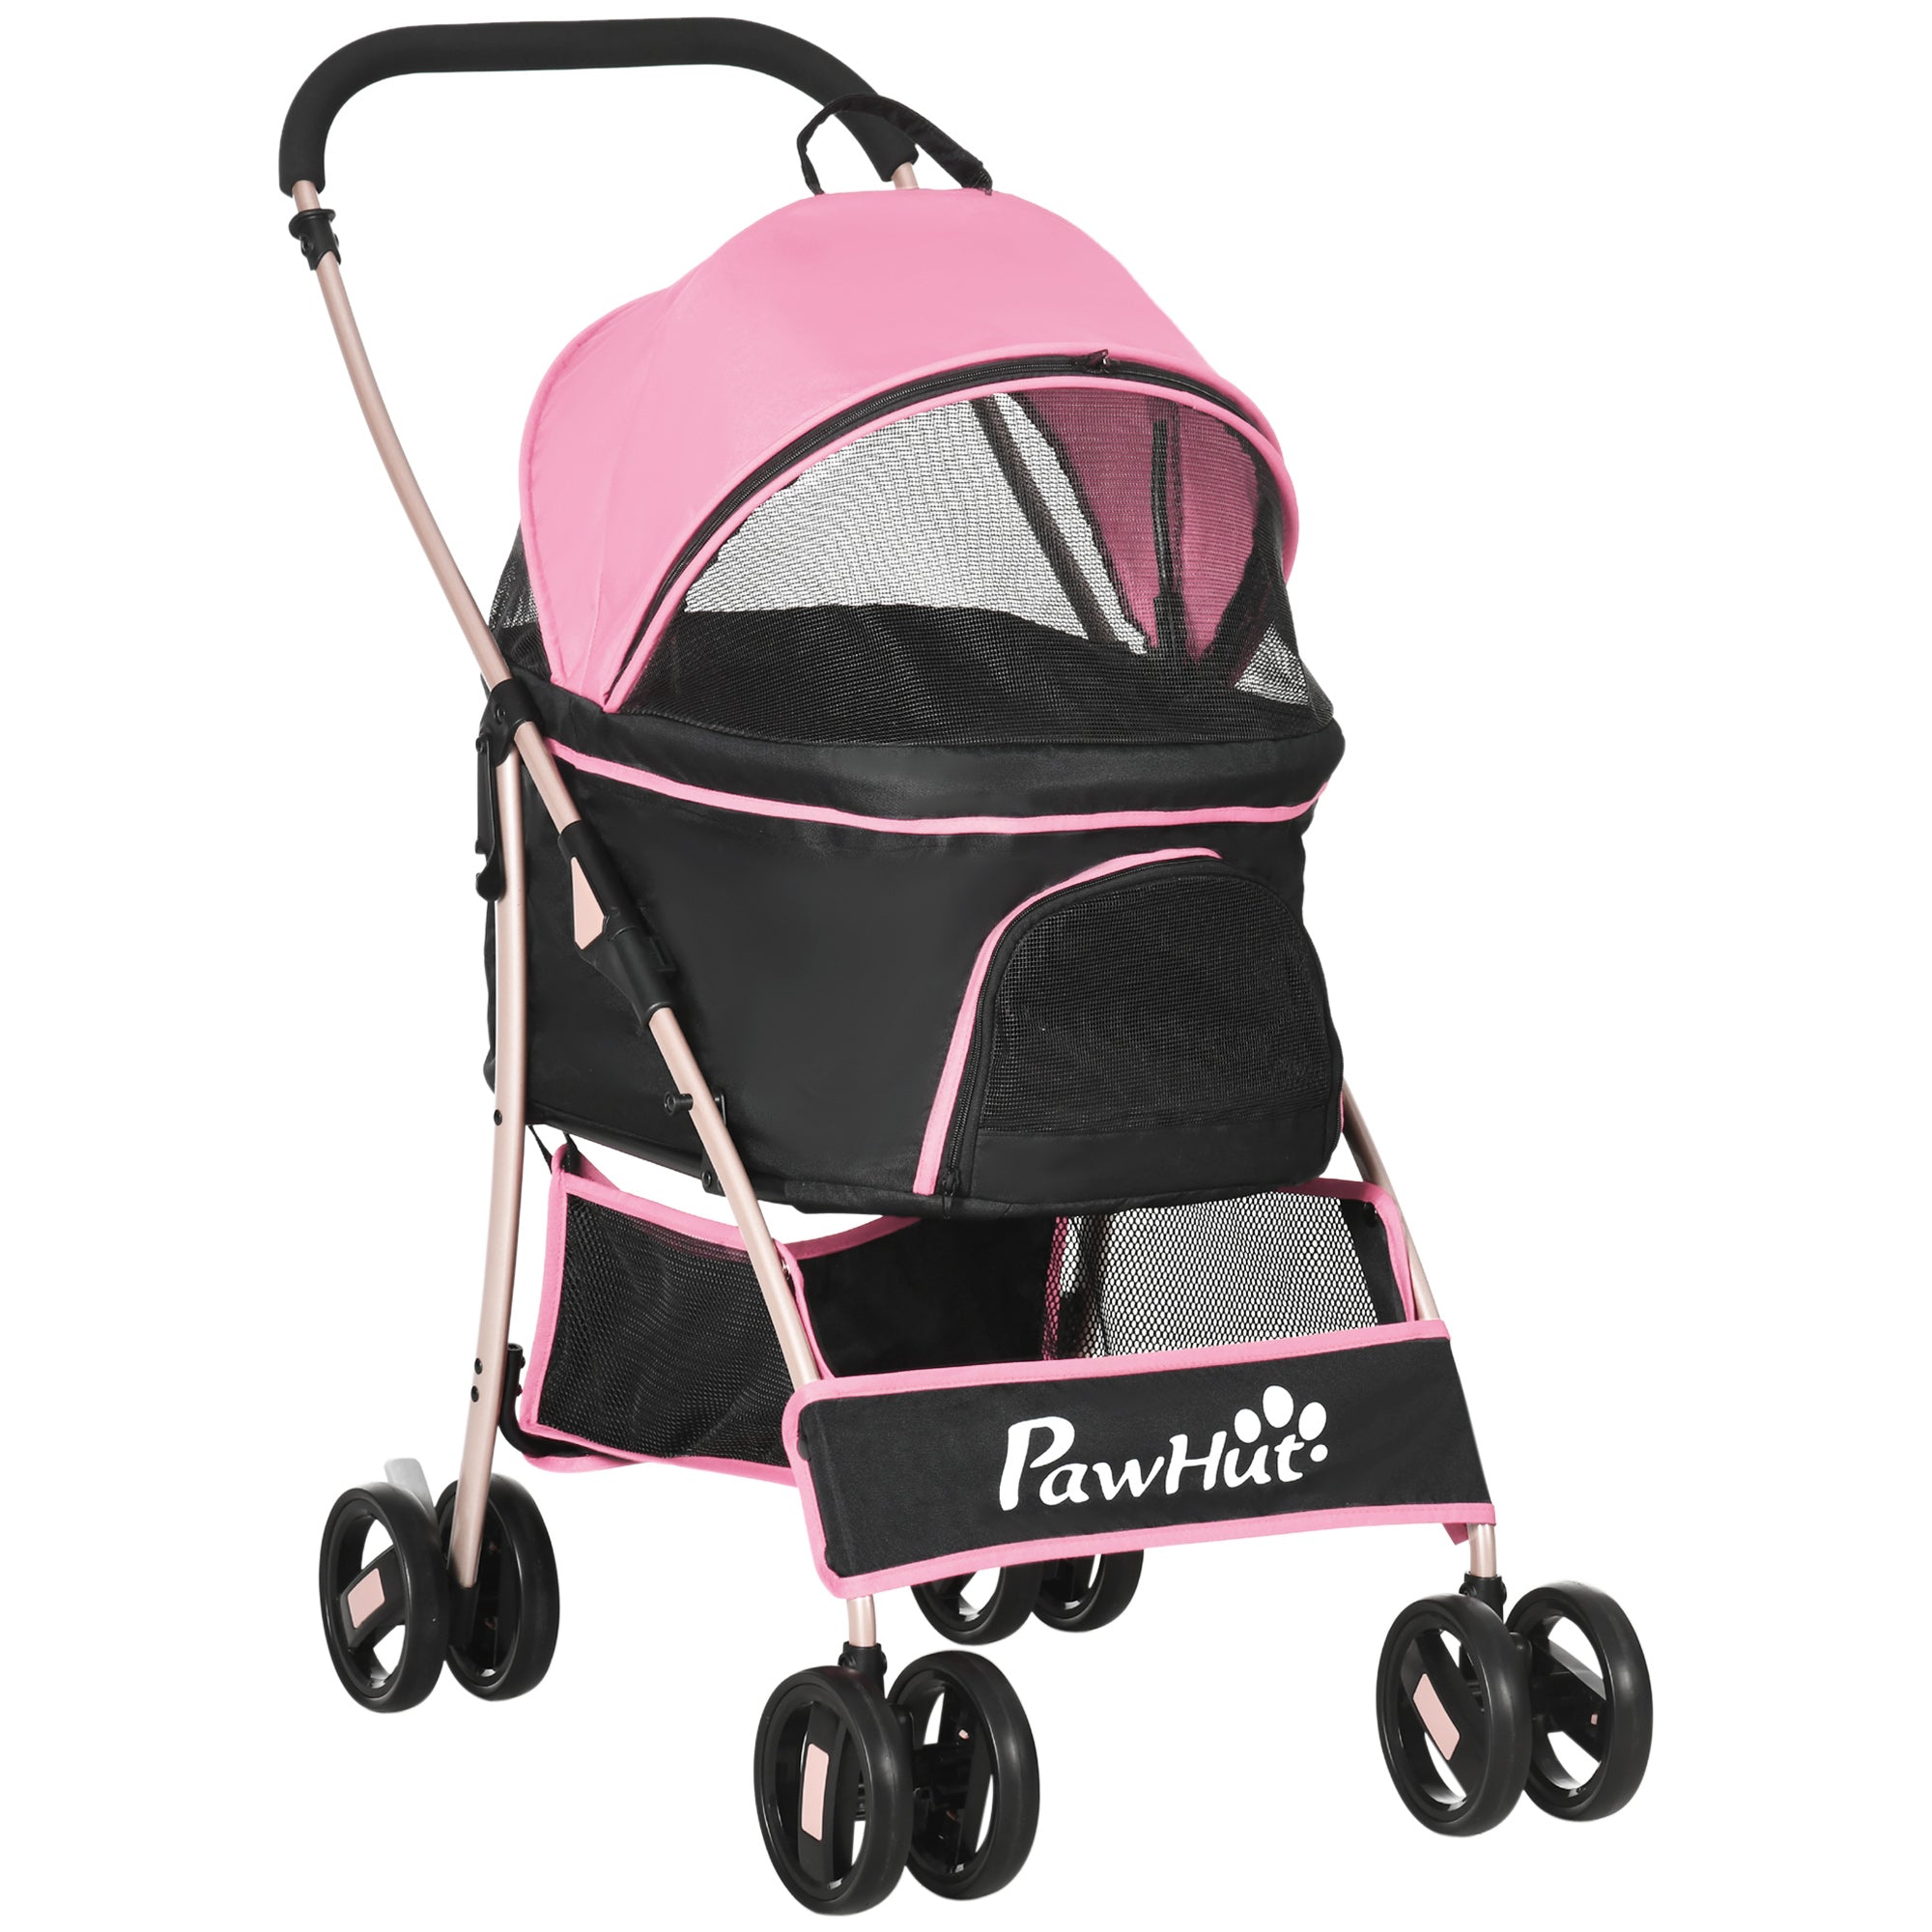 PawHut 3 In 1 Pet Stroller - Detachable Dog Cat Travel Carriage - Pink  | TJ Hughes